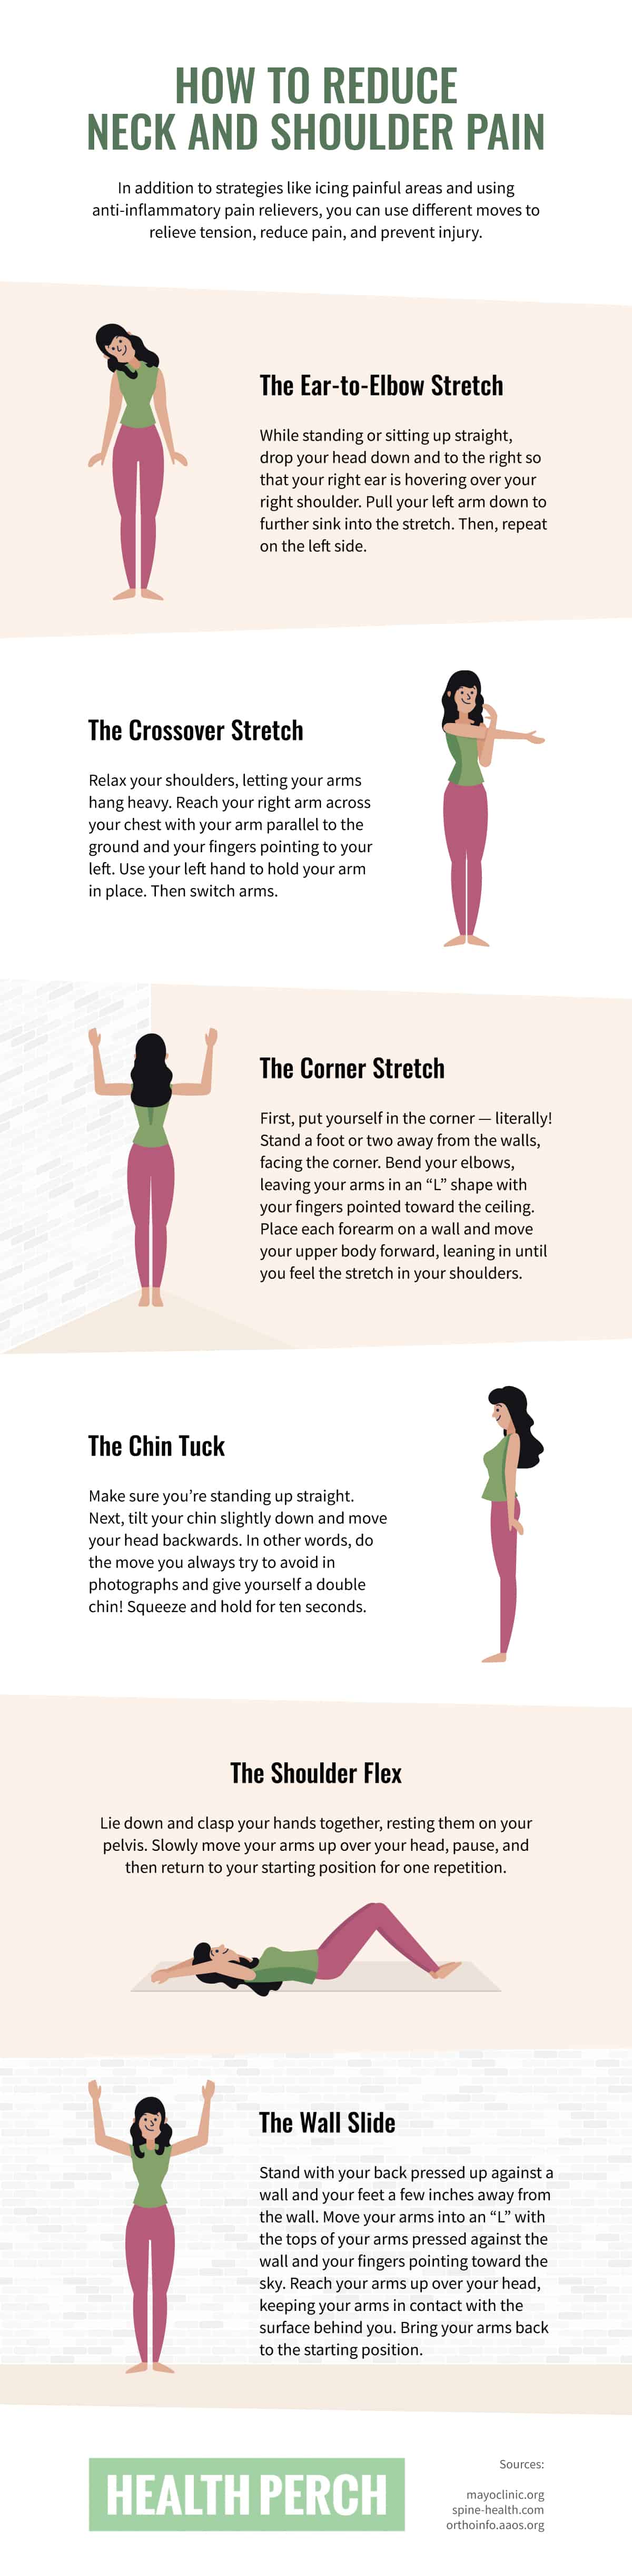 15 Stretches to Relieve Neck and Shoulder Pain - Live Love Fruit